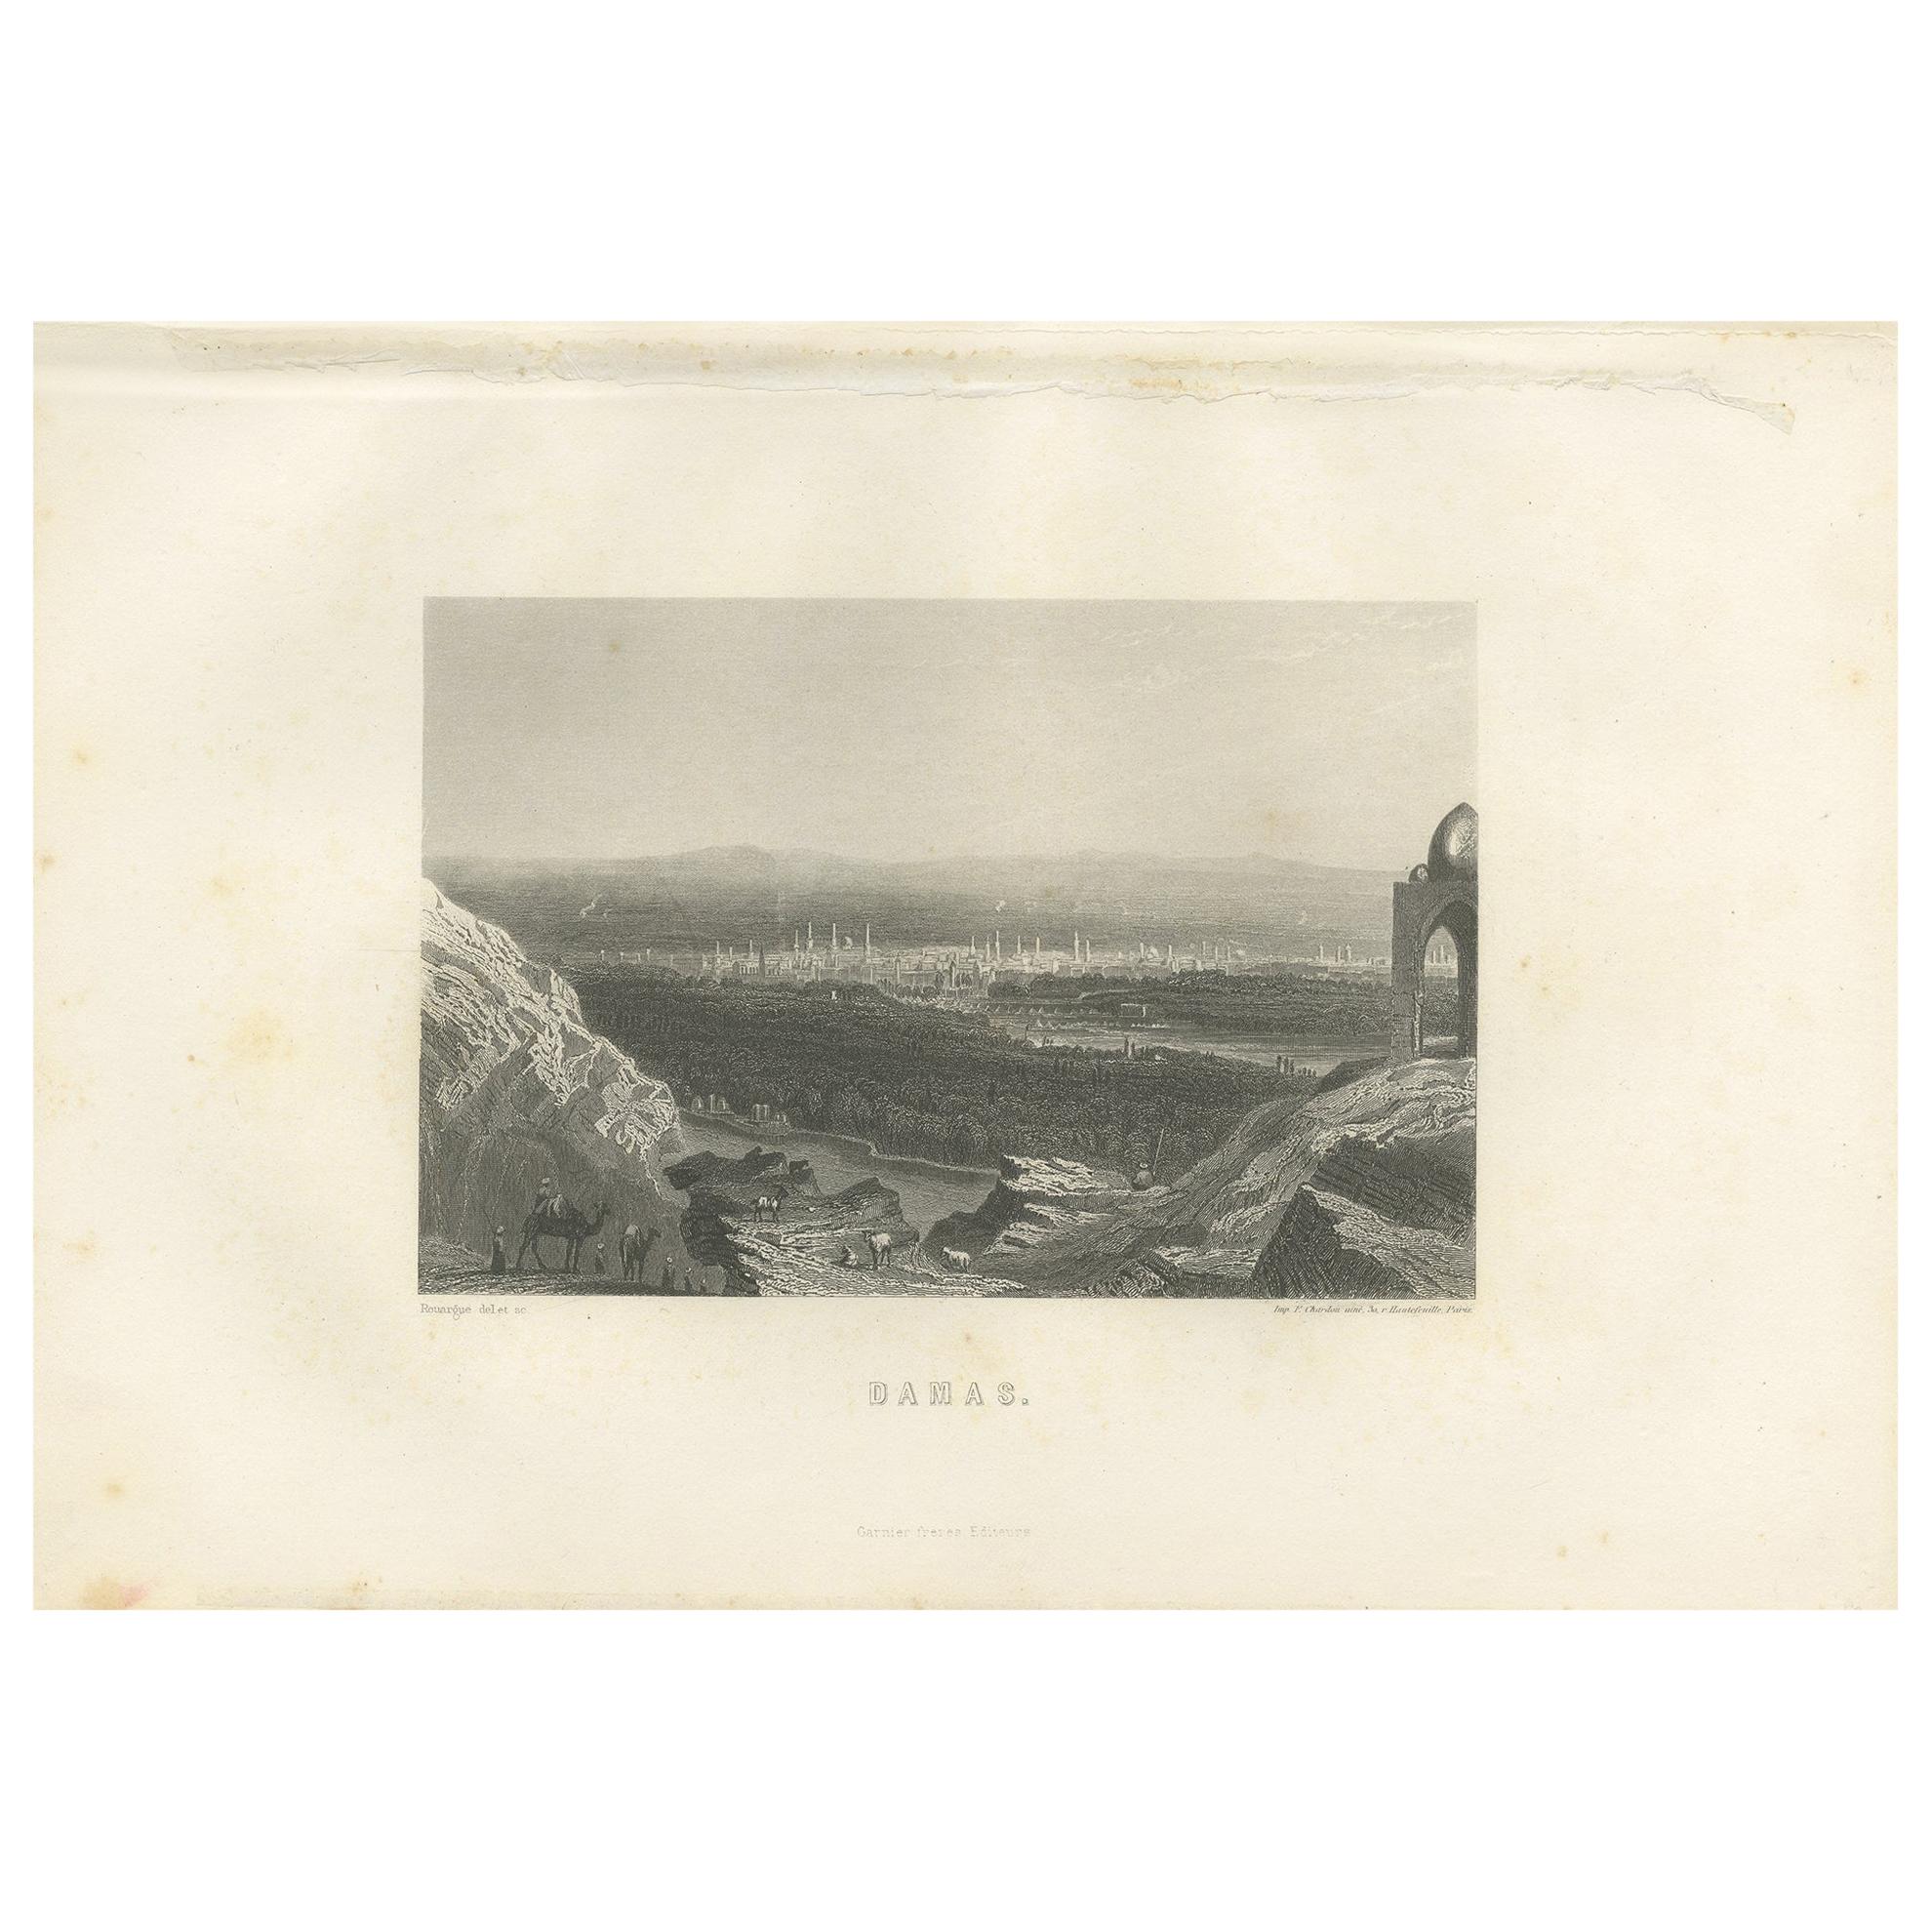 Antique Print of the City of Damas by Grégoire '1883' For Sale